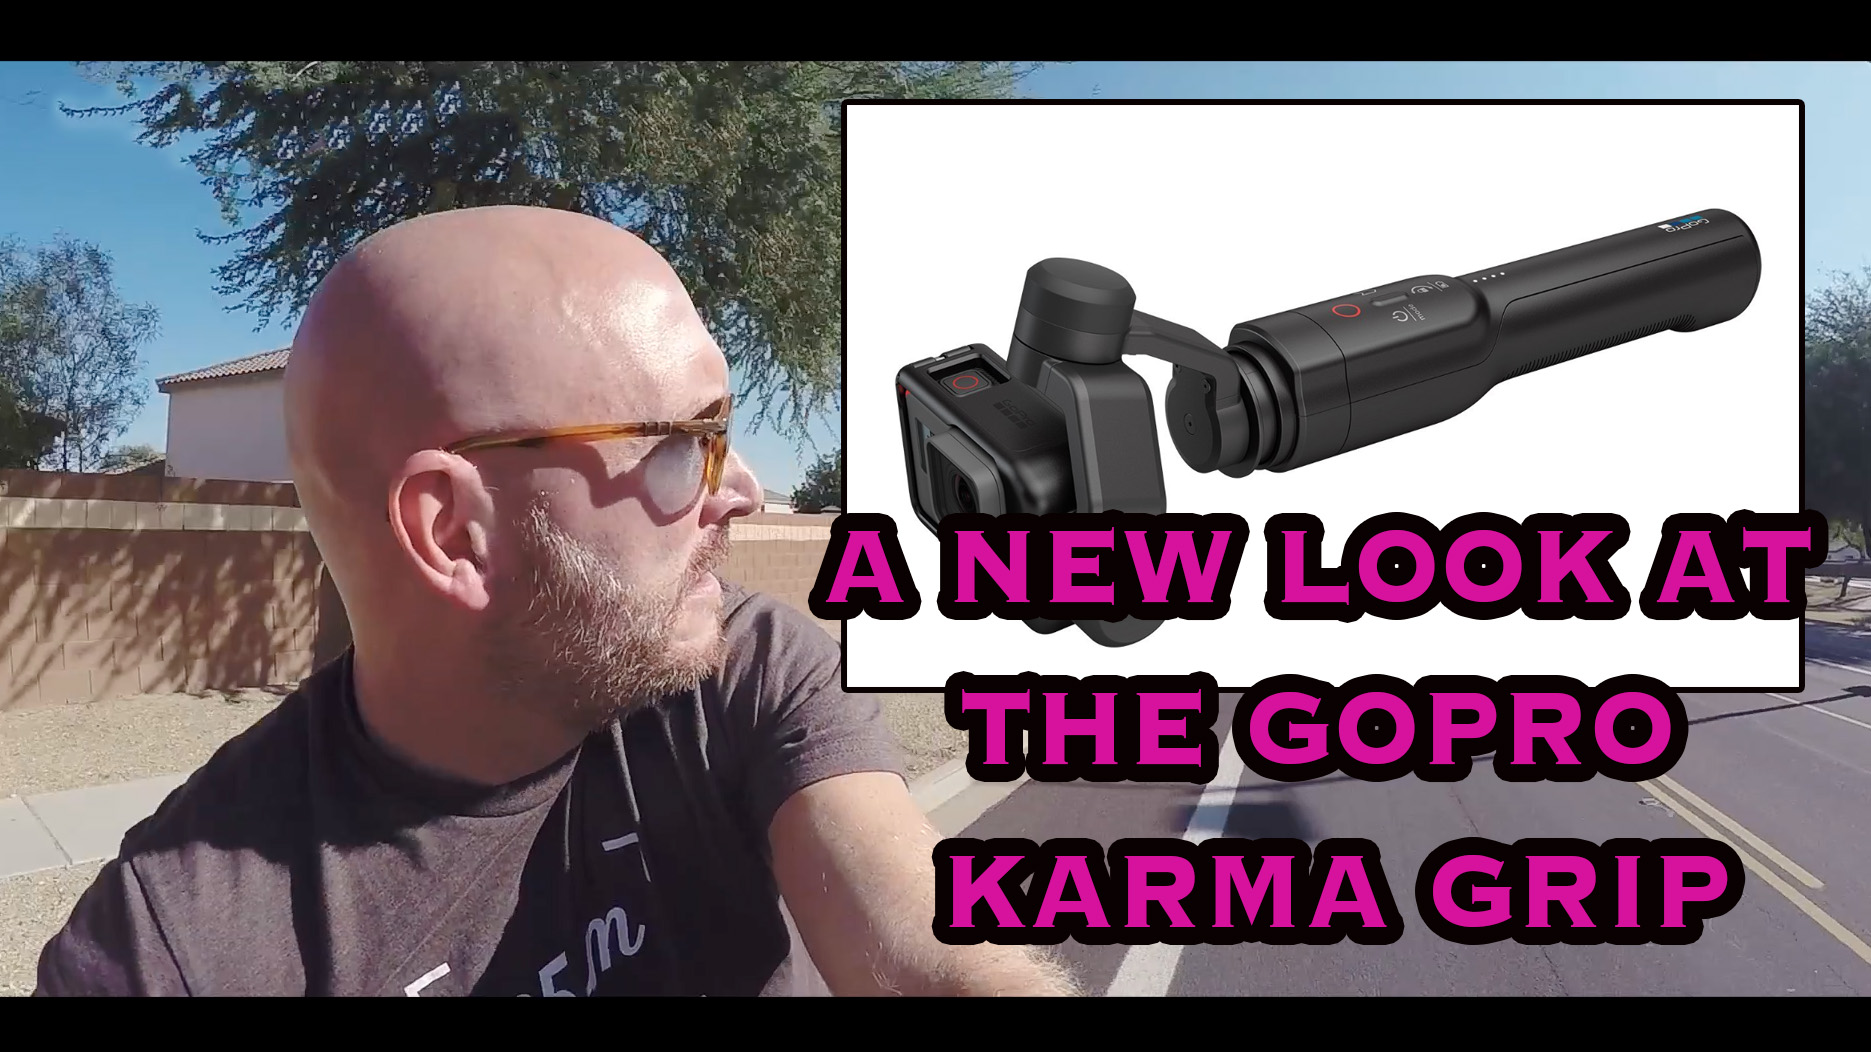 A new look at the GoPro Karma Grip. See what a gimbal can do for